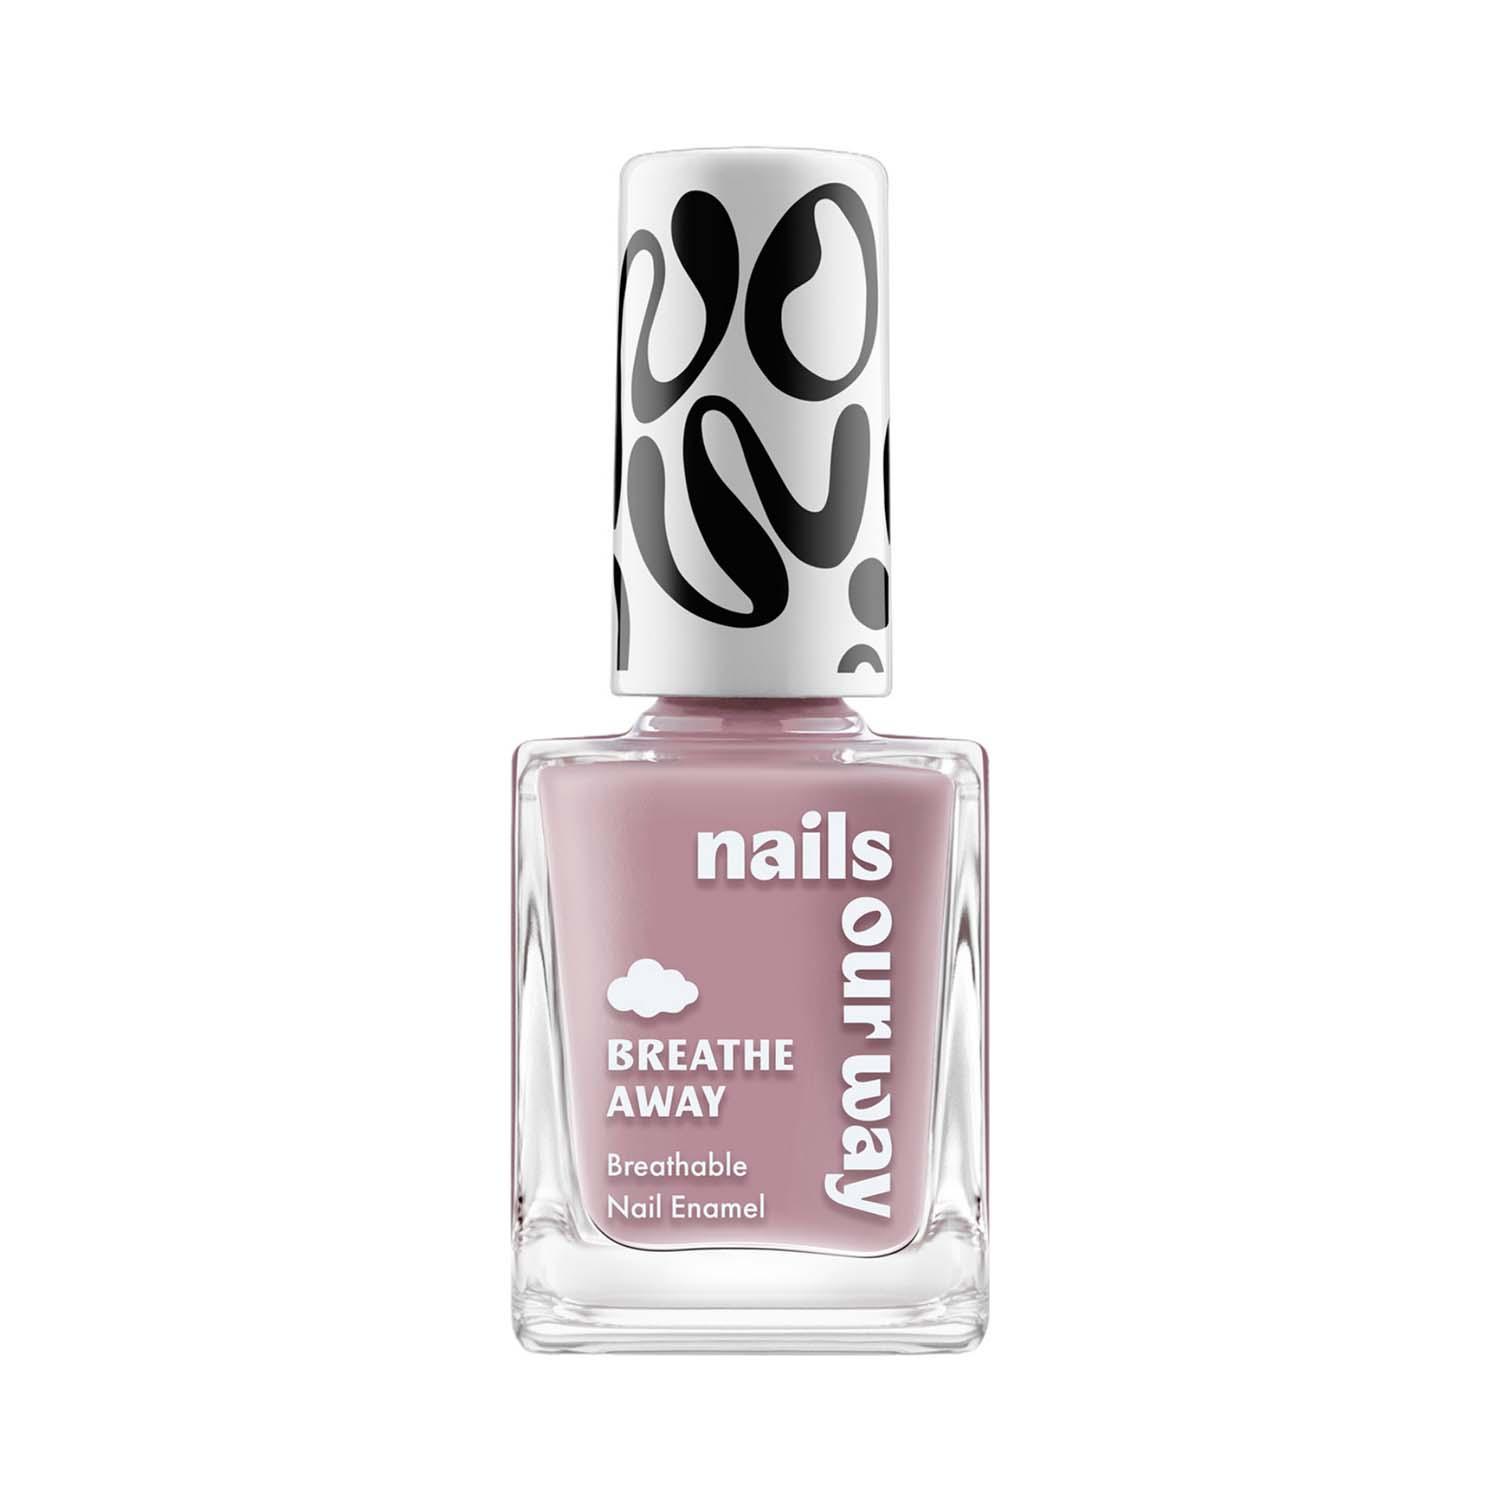 Nails Our Way | Nails Our Way Breathe Away Nail Enamel - Squirrel (10 ml)